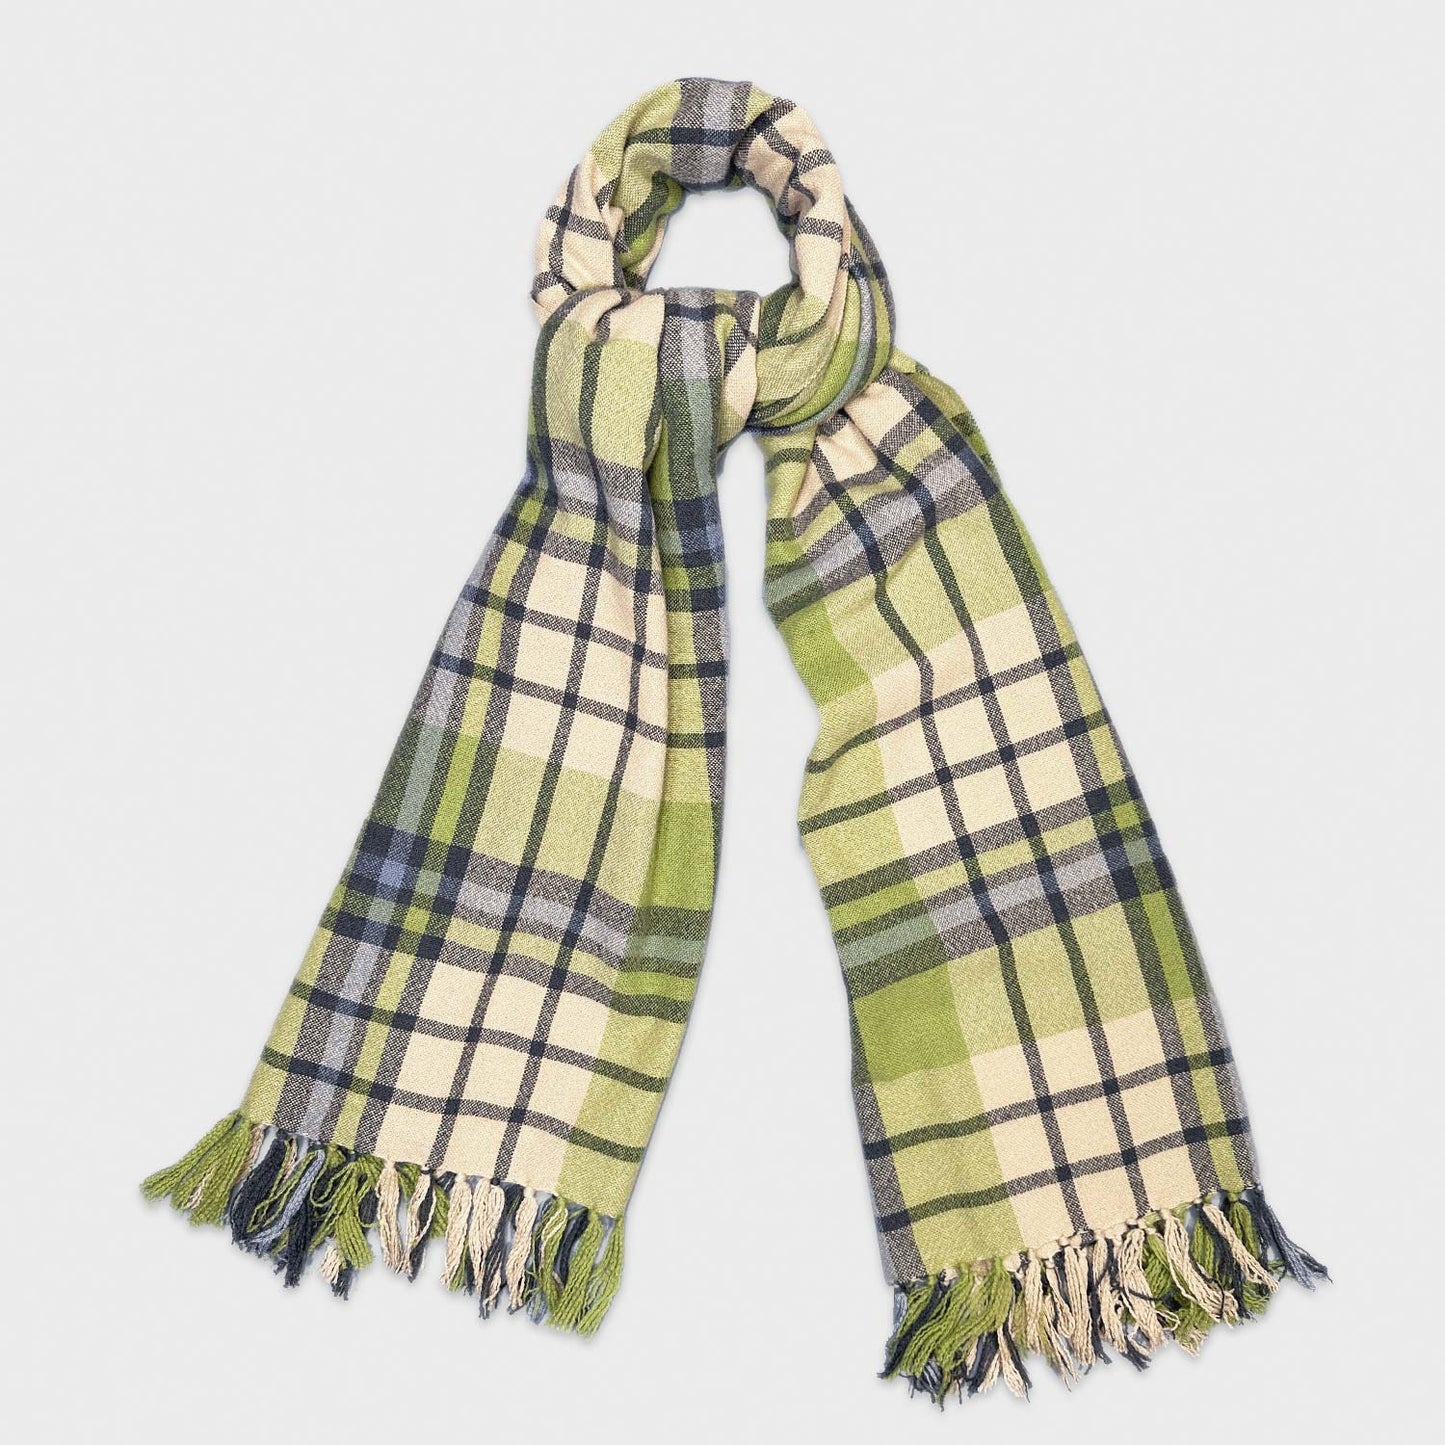 Lime Green Cashmere Scarf Tartan 19 andrea's 47. Refined shawl, iconic pattern plaid cashmere scarf, lime green and navy blue colors. Ideal as a unisex scarf or cashmere shrug, made in Italy by 19 Andrea's 47 for Wools Boutique Uomo